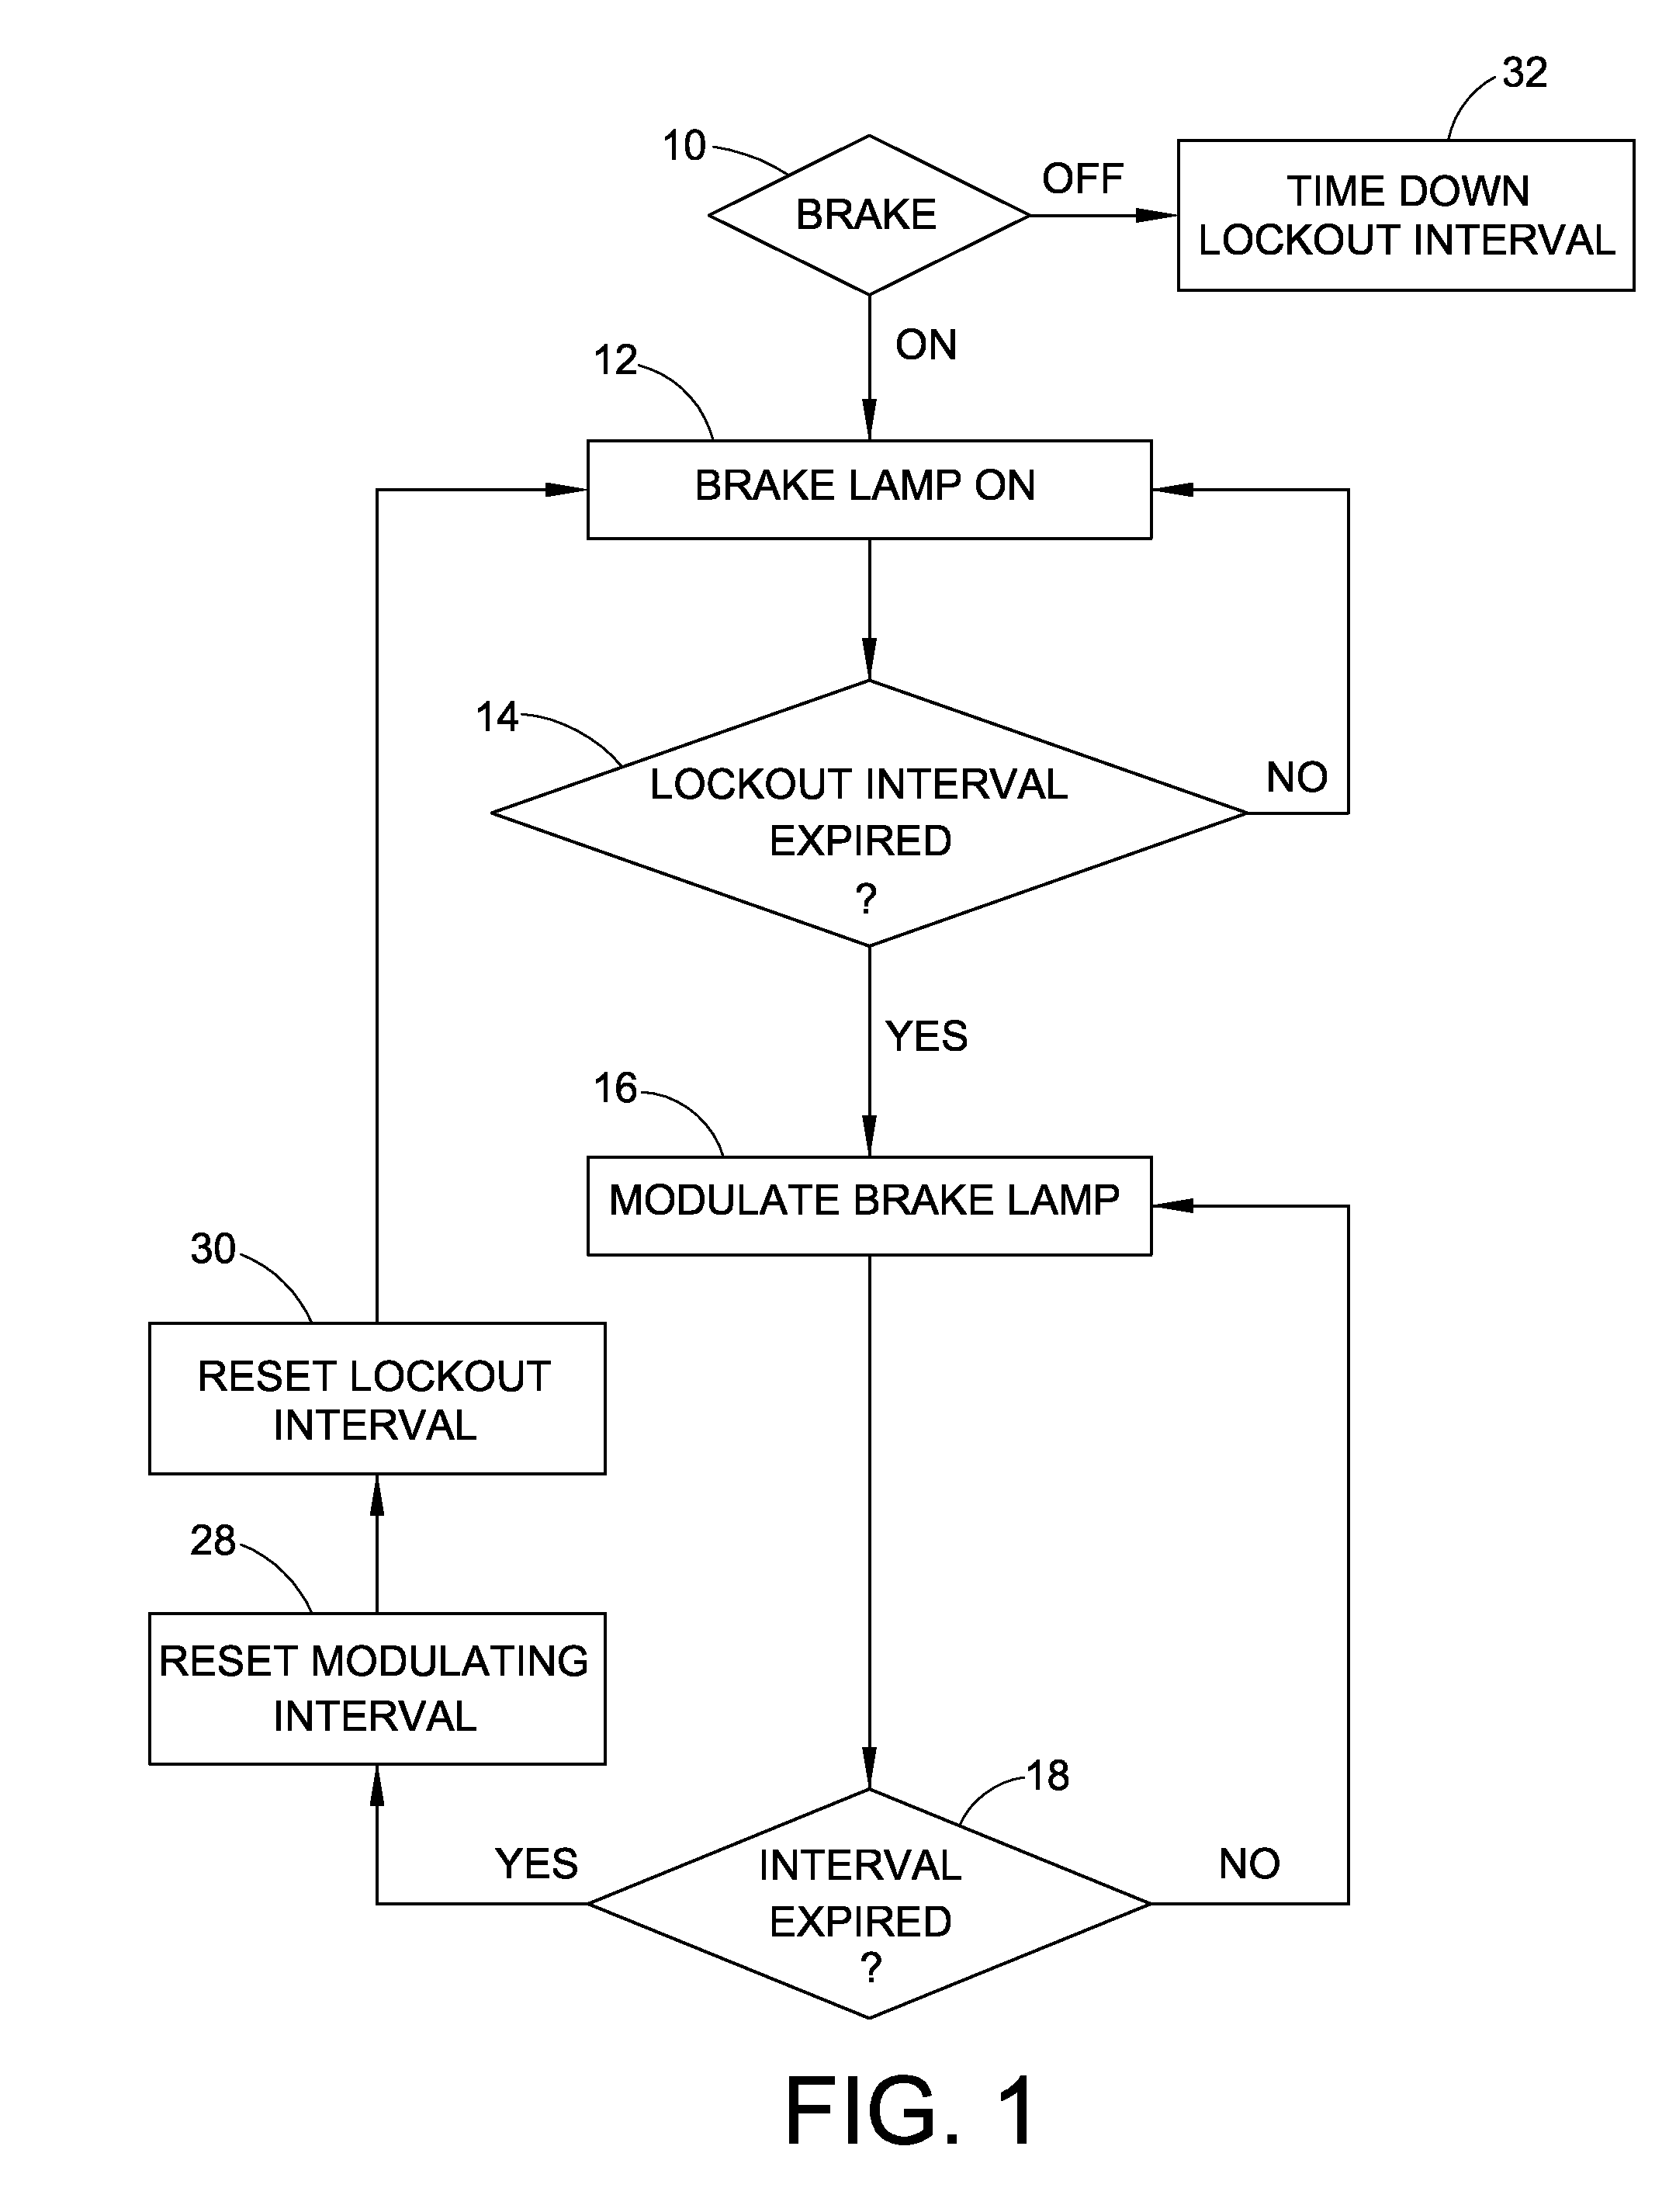 Modulated intensity flasher for vehicle brake light with accelerometer detection of hard-braking movement and backing-out indicator